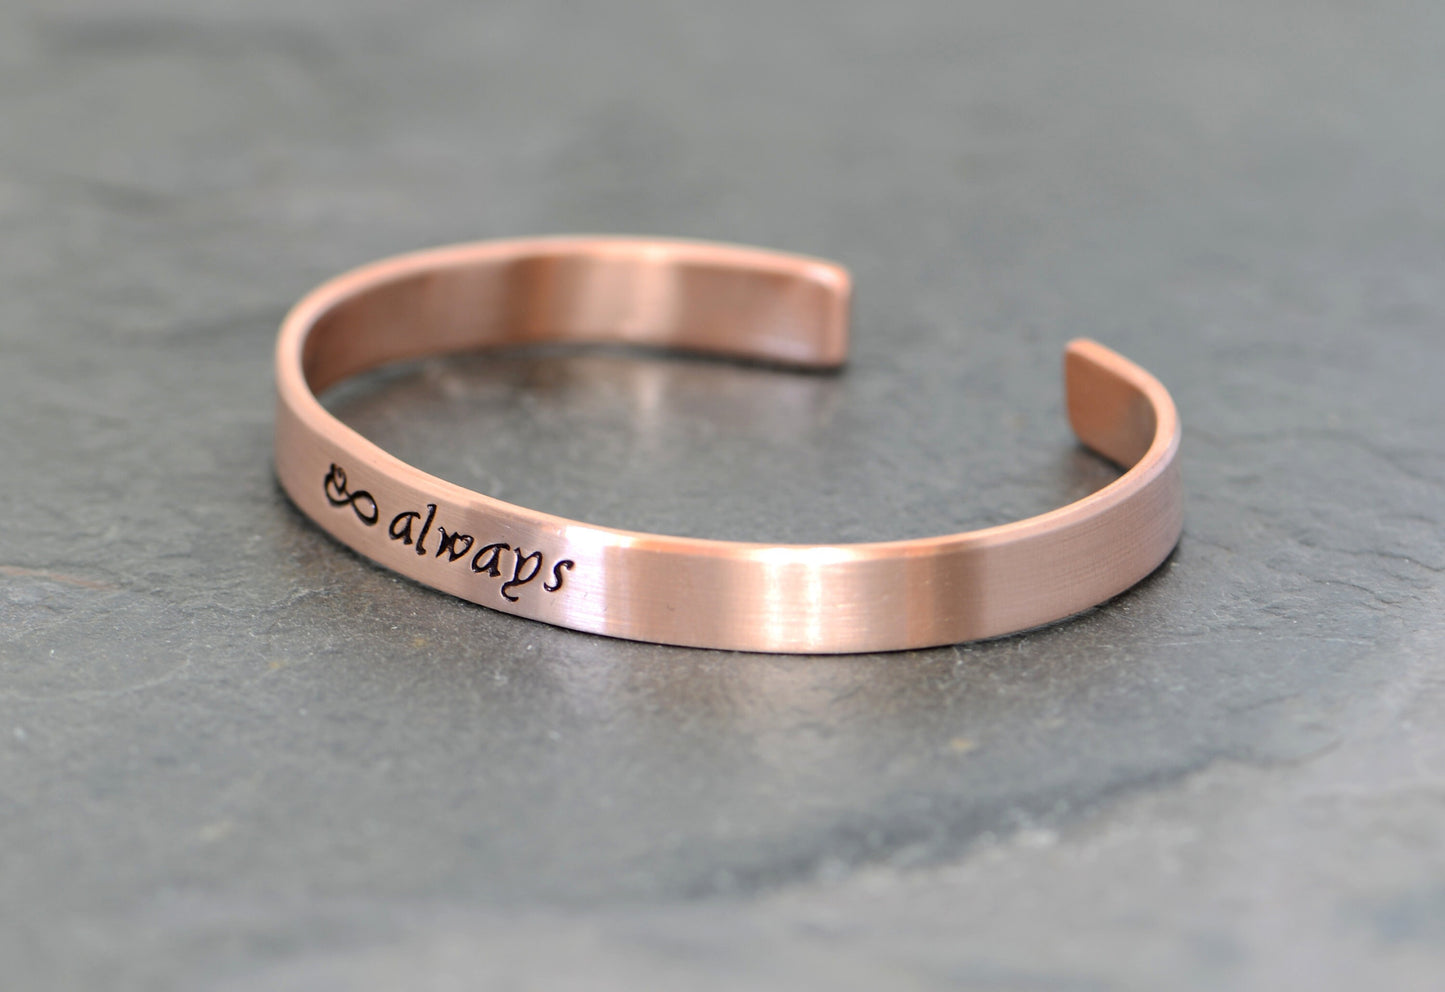 copper cuff bracelet for 7th anniversary or copper anniversary - or just because - infinity sign and always